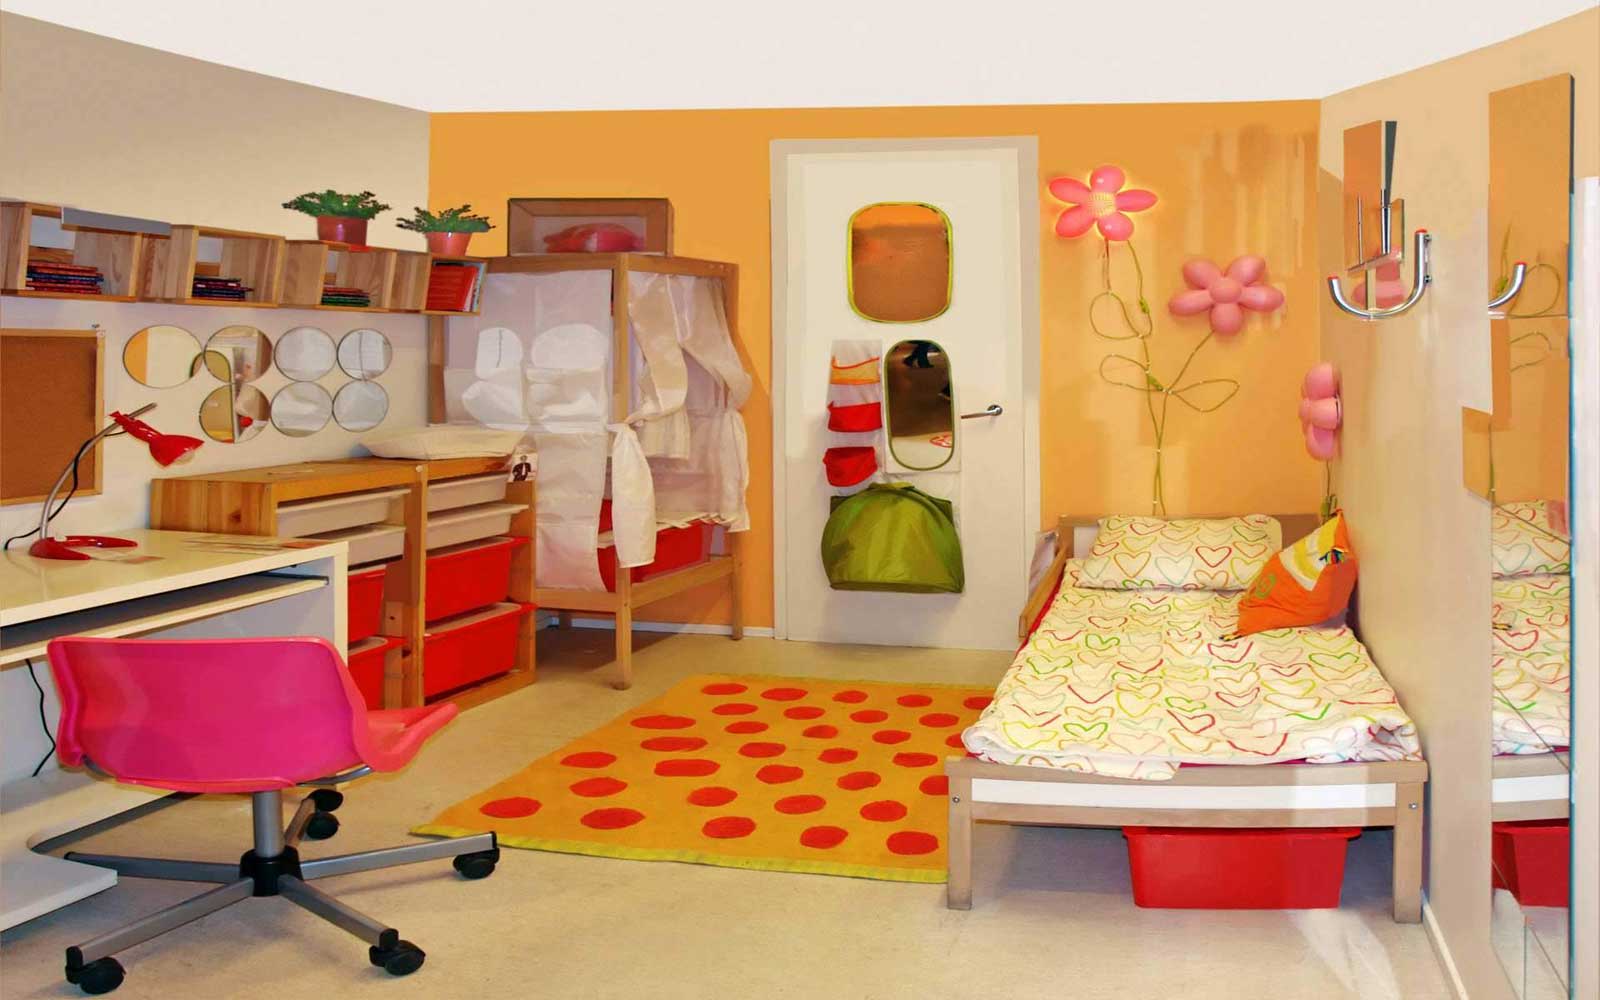 Small Kids With Colorful Small Kids Room Ideas With Simple Bedroom Kids Room Interior And Modern Wooden Furniture Set Kids Room Design Also Small Desk Study Kids Room Furniture Decoration The Important Aspect Of The Kids Room Ideas